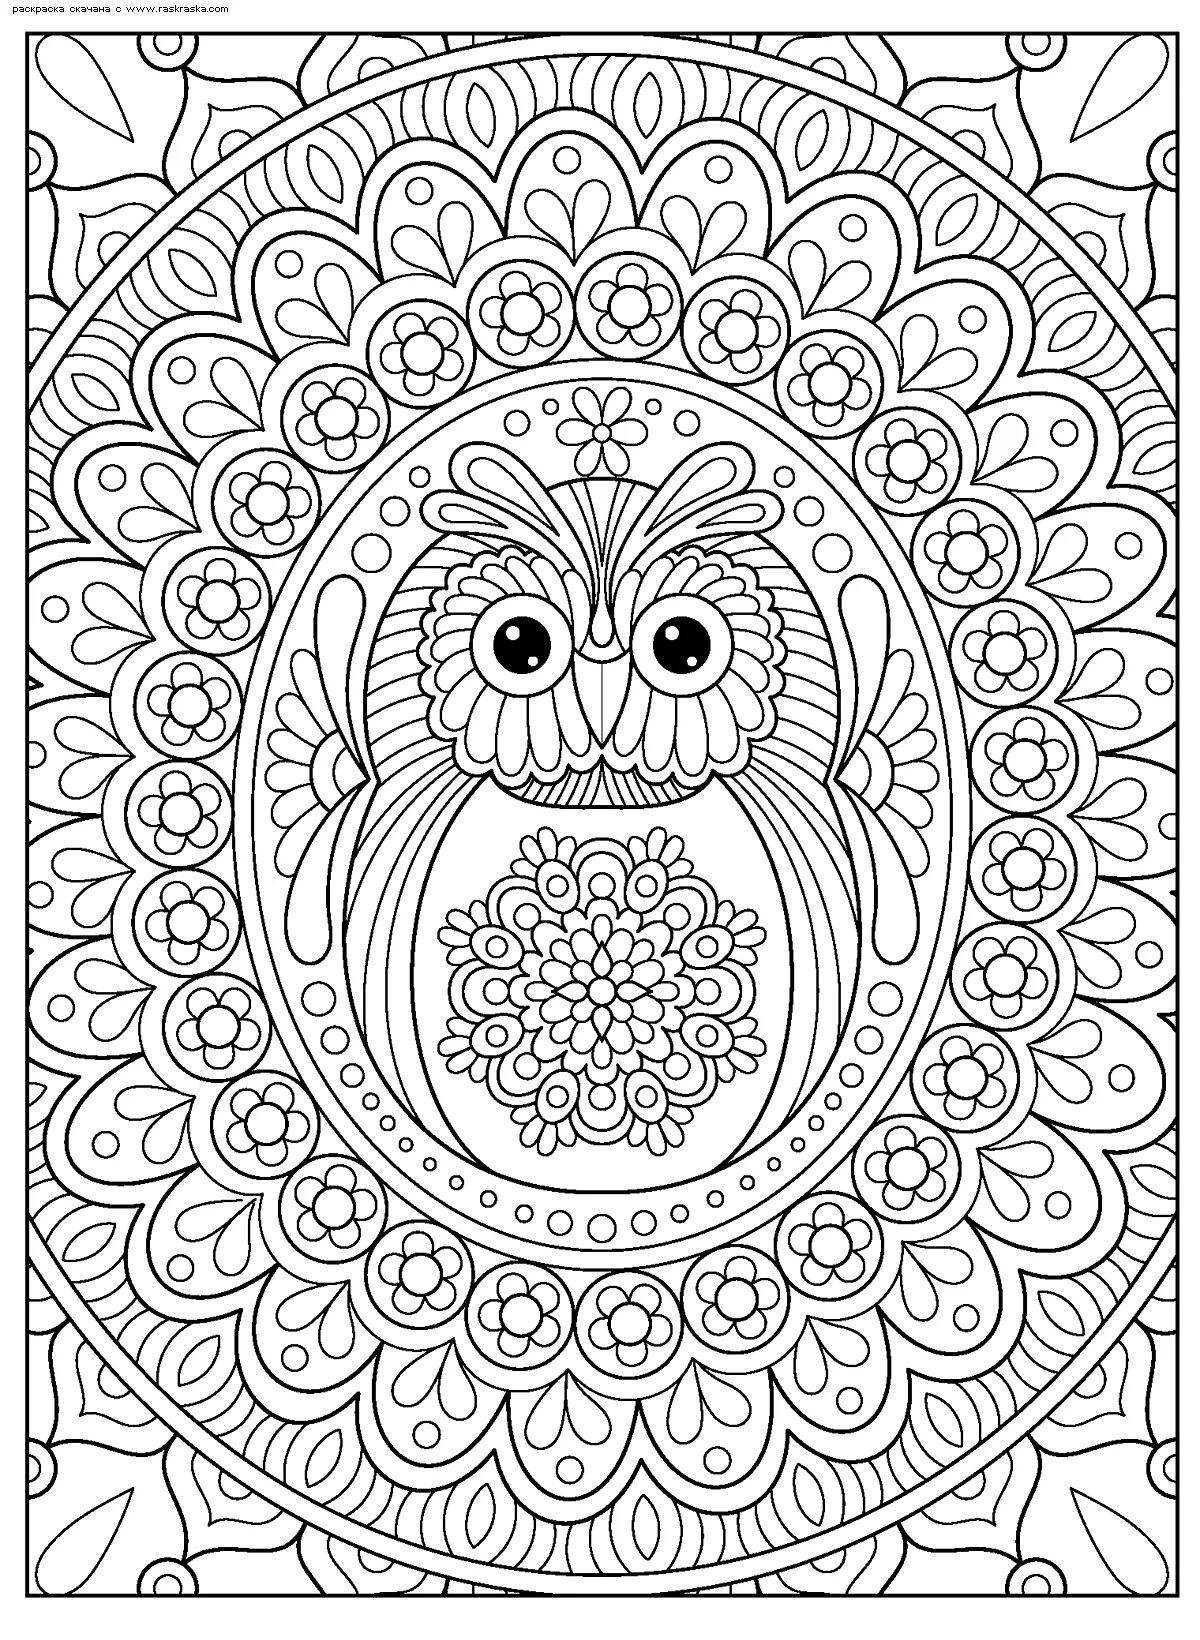 Radiant coloring page complex owl